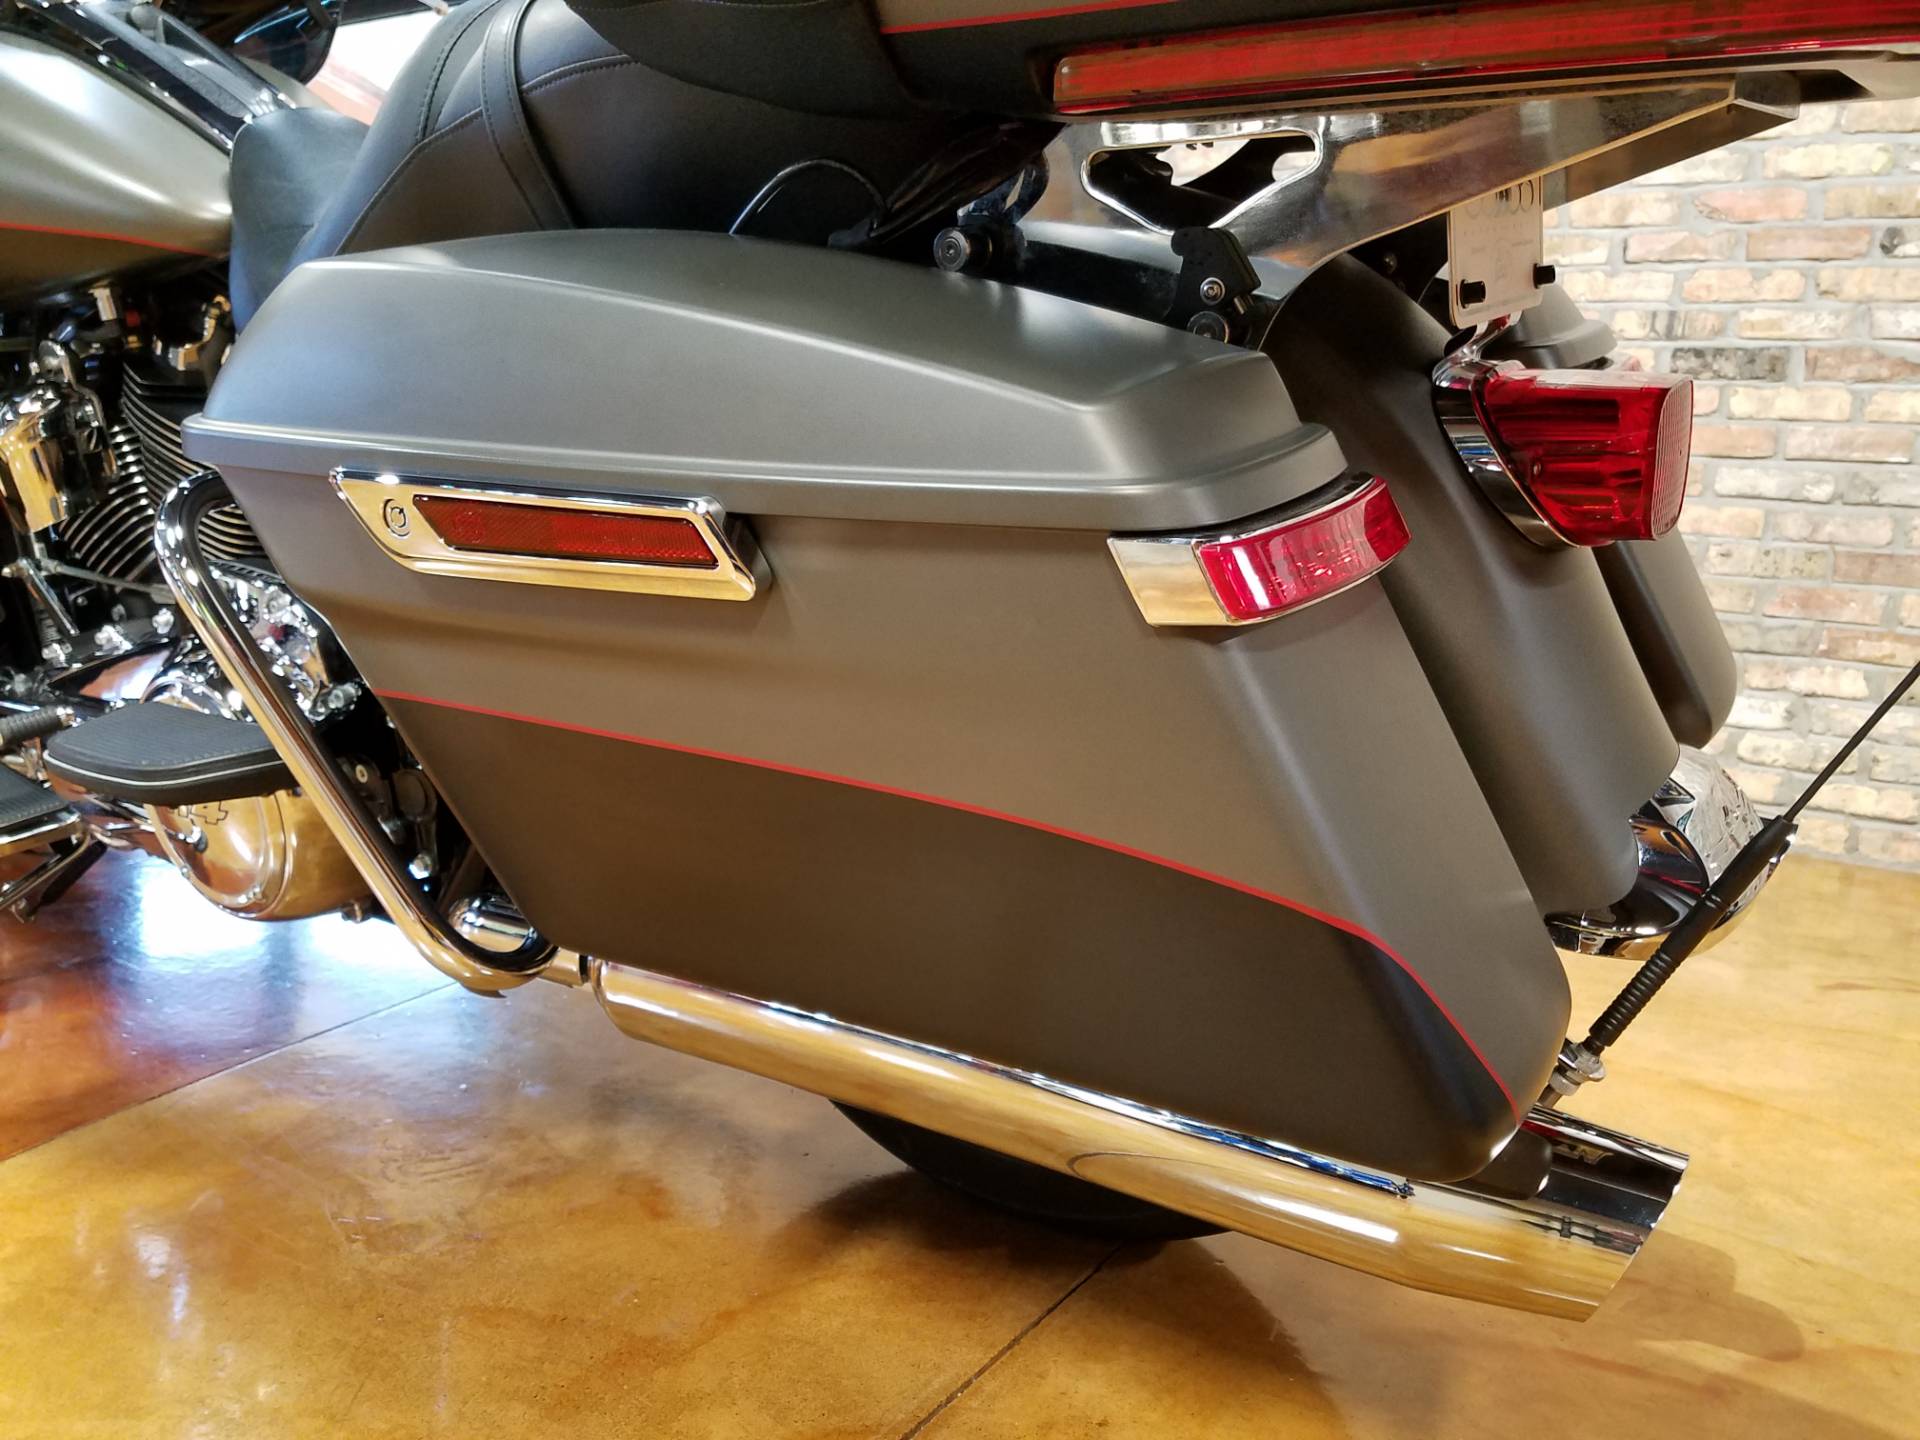 2019 Harley-Davidson Ultra Limited in Big Bend, Wisconsin - Photo 48